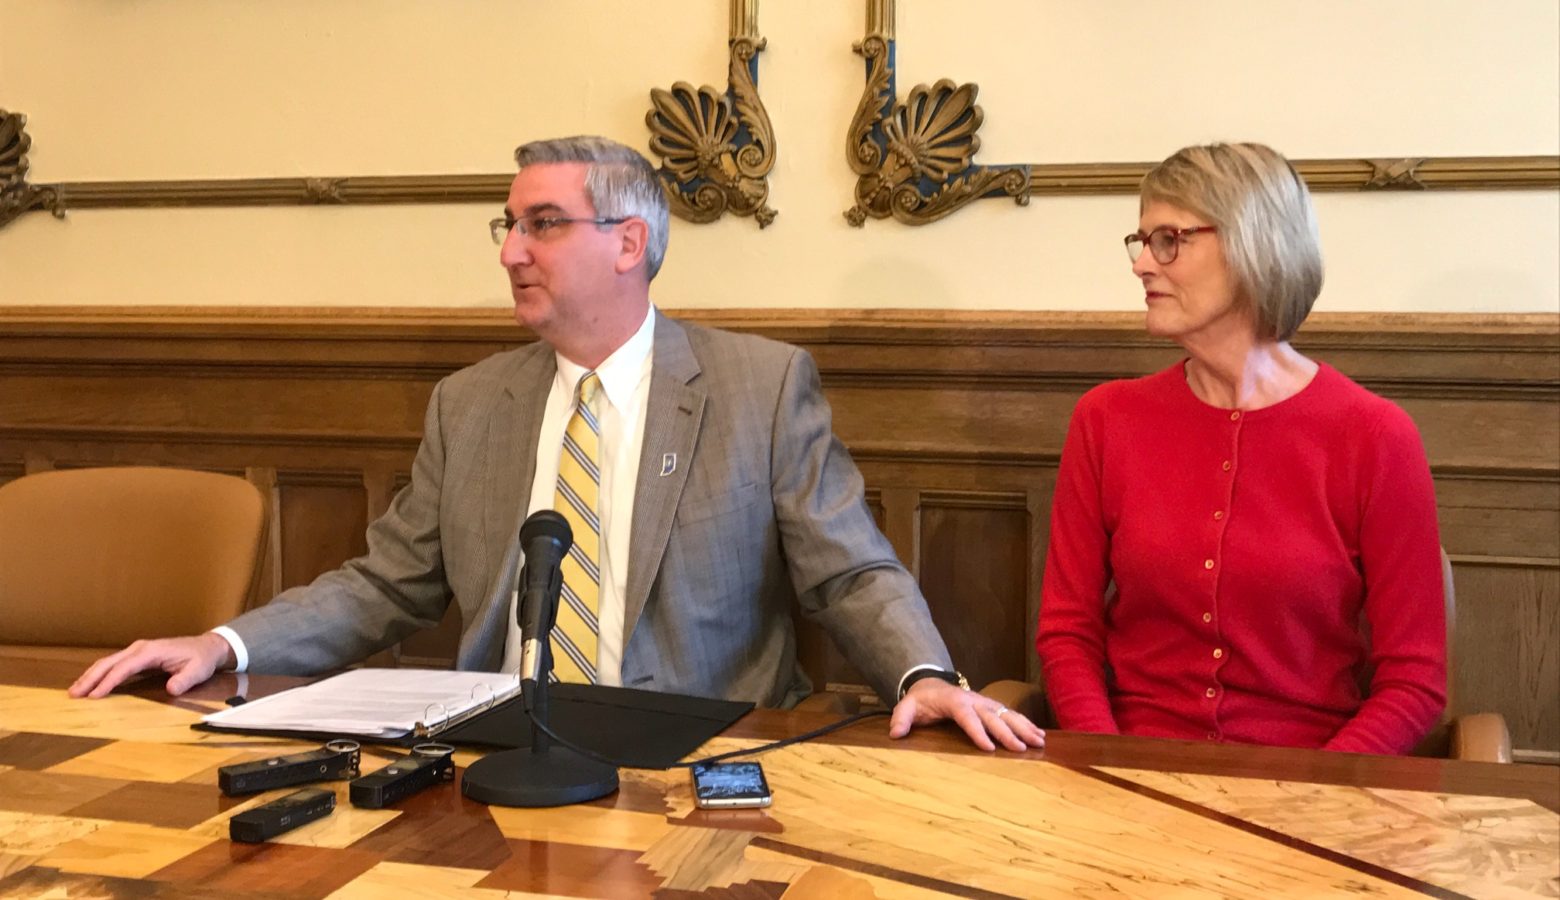 Governor Eric Holcomb used his first veto to reject a bill creating fees for public records searches. (Brandon Smith/IPB News)